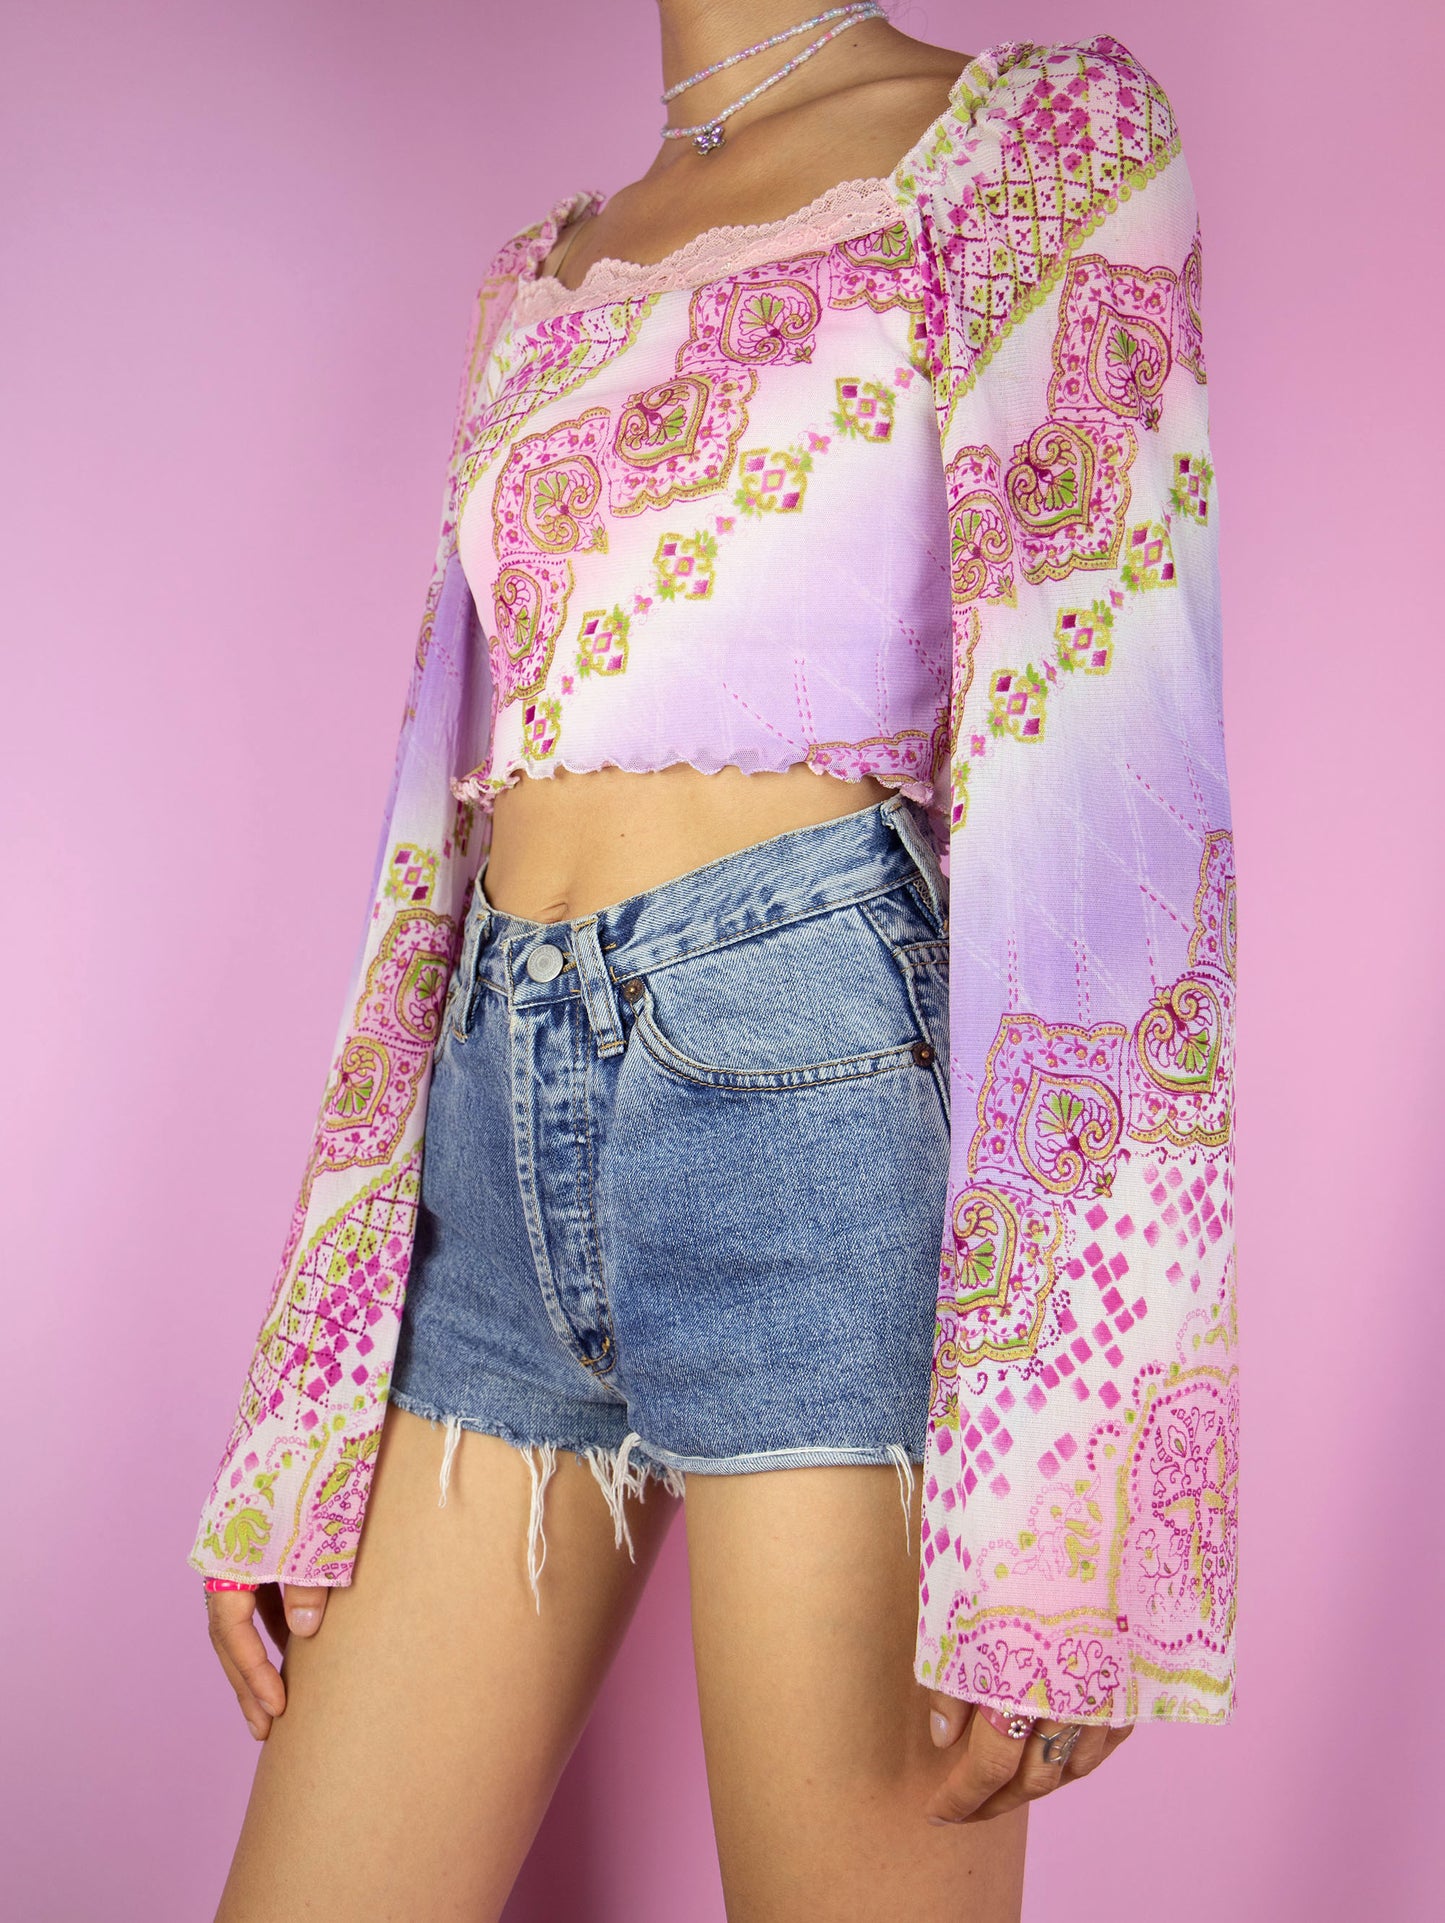 The Y2K Fairy Pink Mesh Top is a vintage abstract floral paisley graphic semi-sheer mesh crop top with bell sleeves and lace details. Boho romantic 2000s cyber coquette shirt.